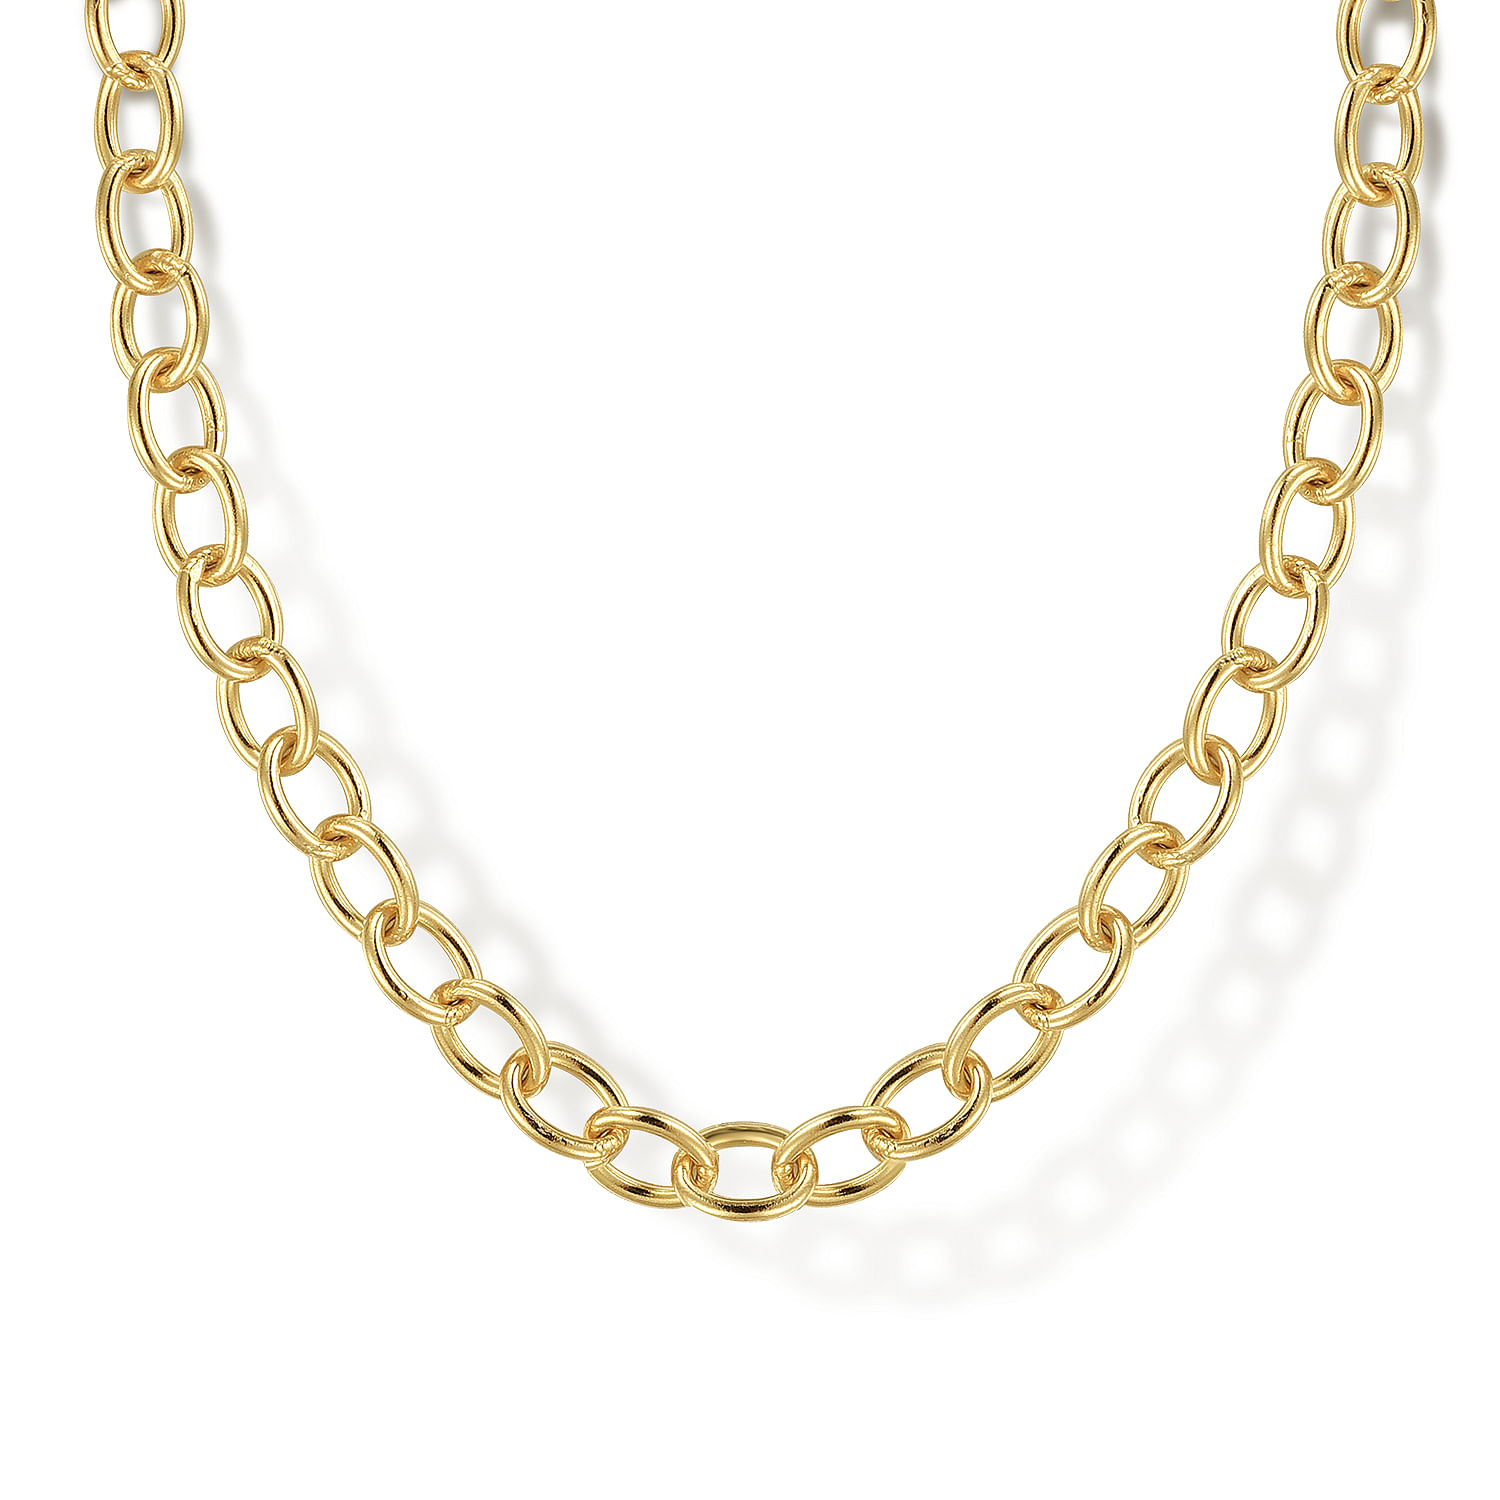 Gabriel - 14K Yellow Gold Oval Link Chain Necklace